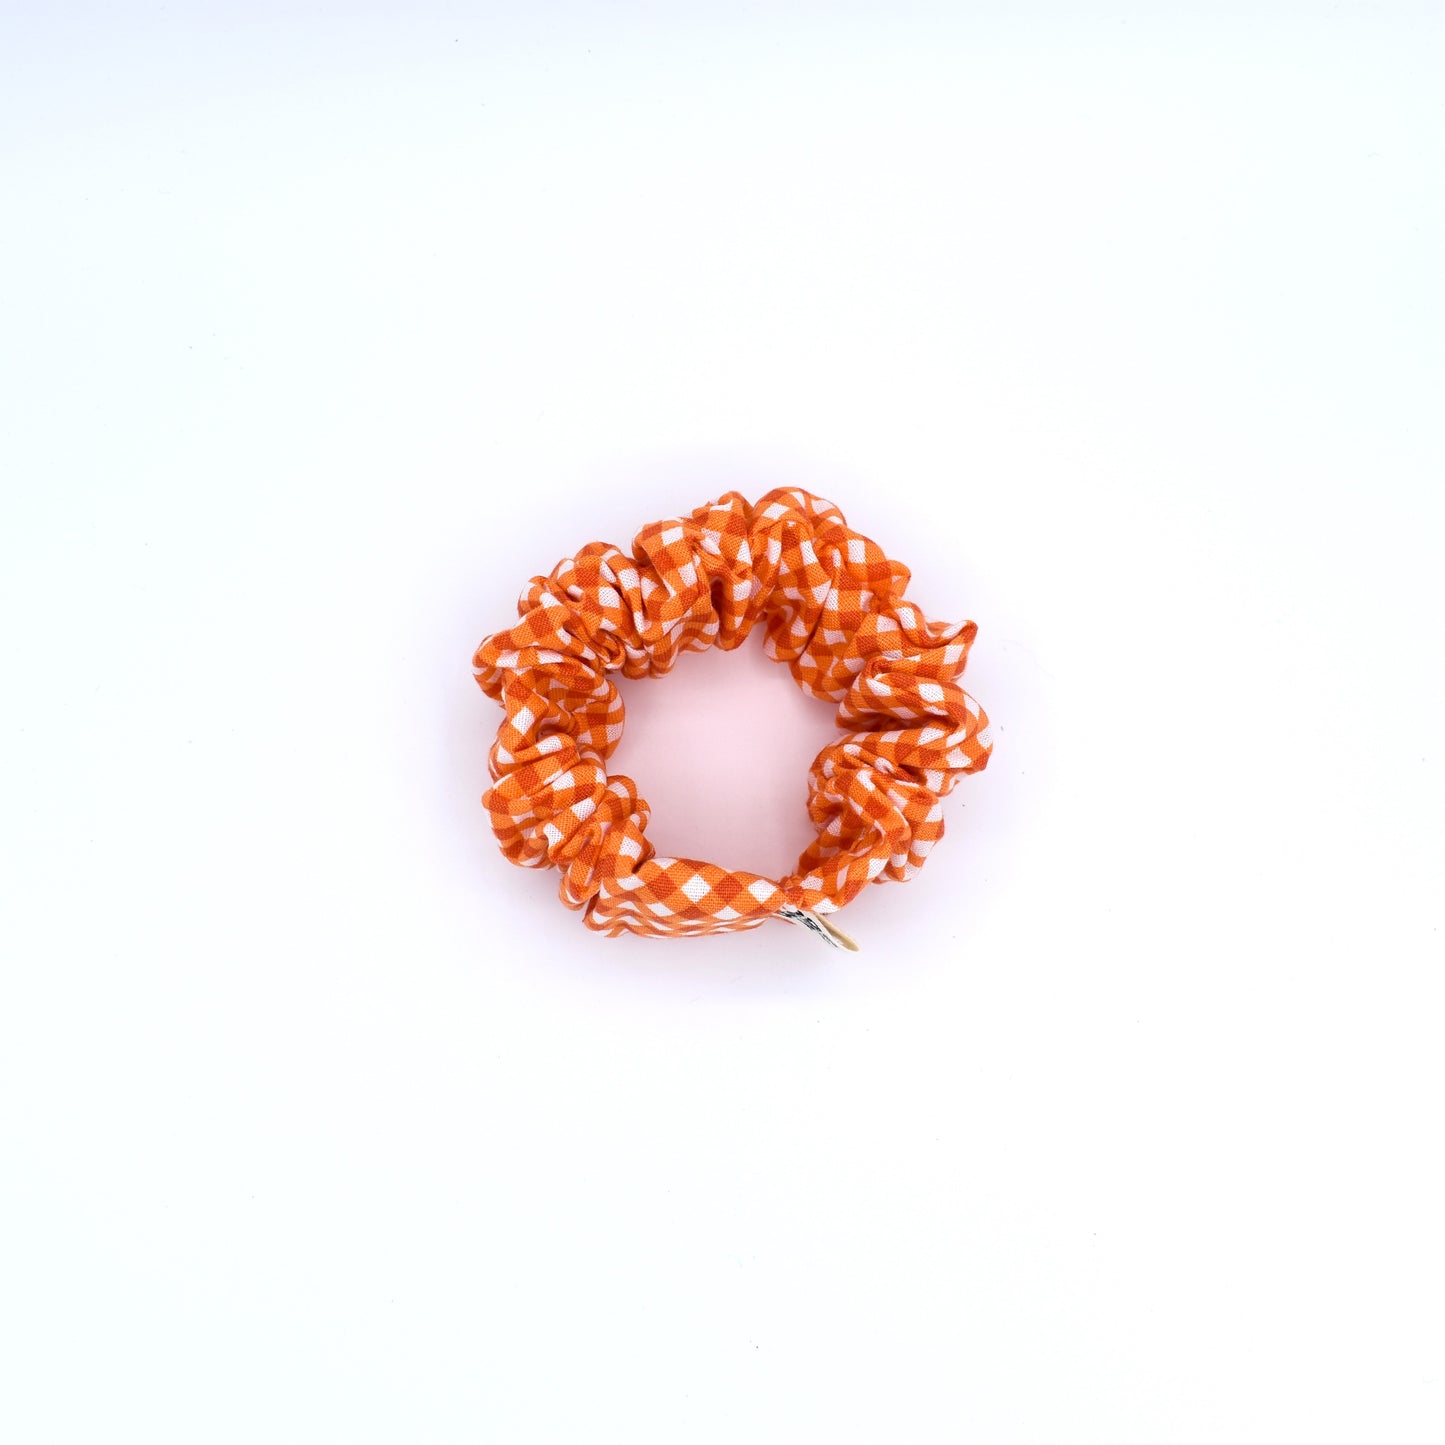 Orange Checked Scrunchie with The Crafty Chicky tag